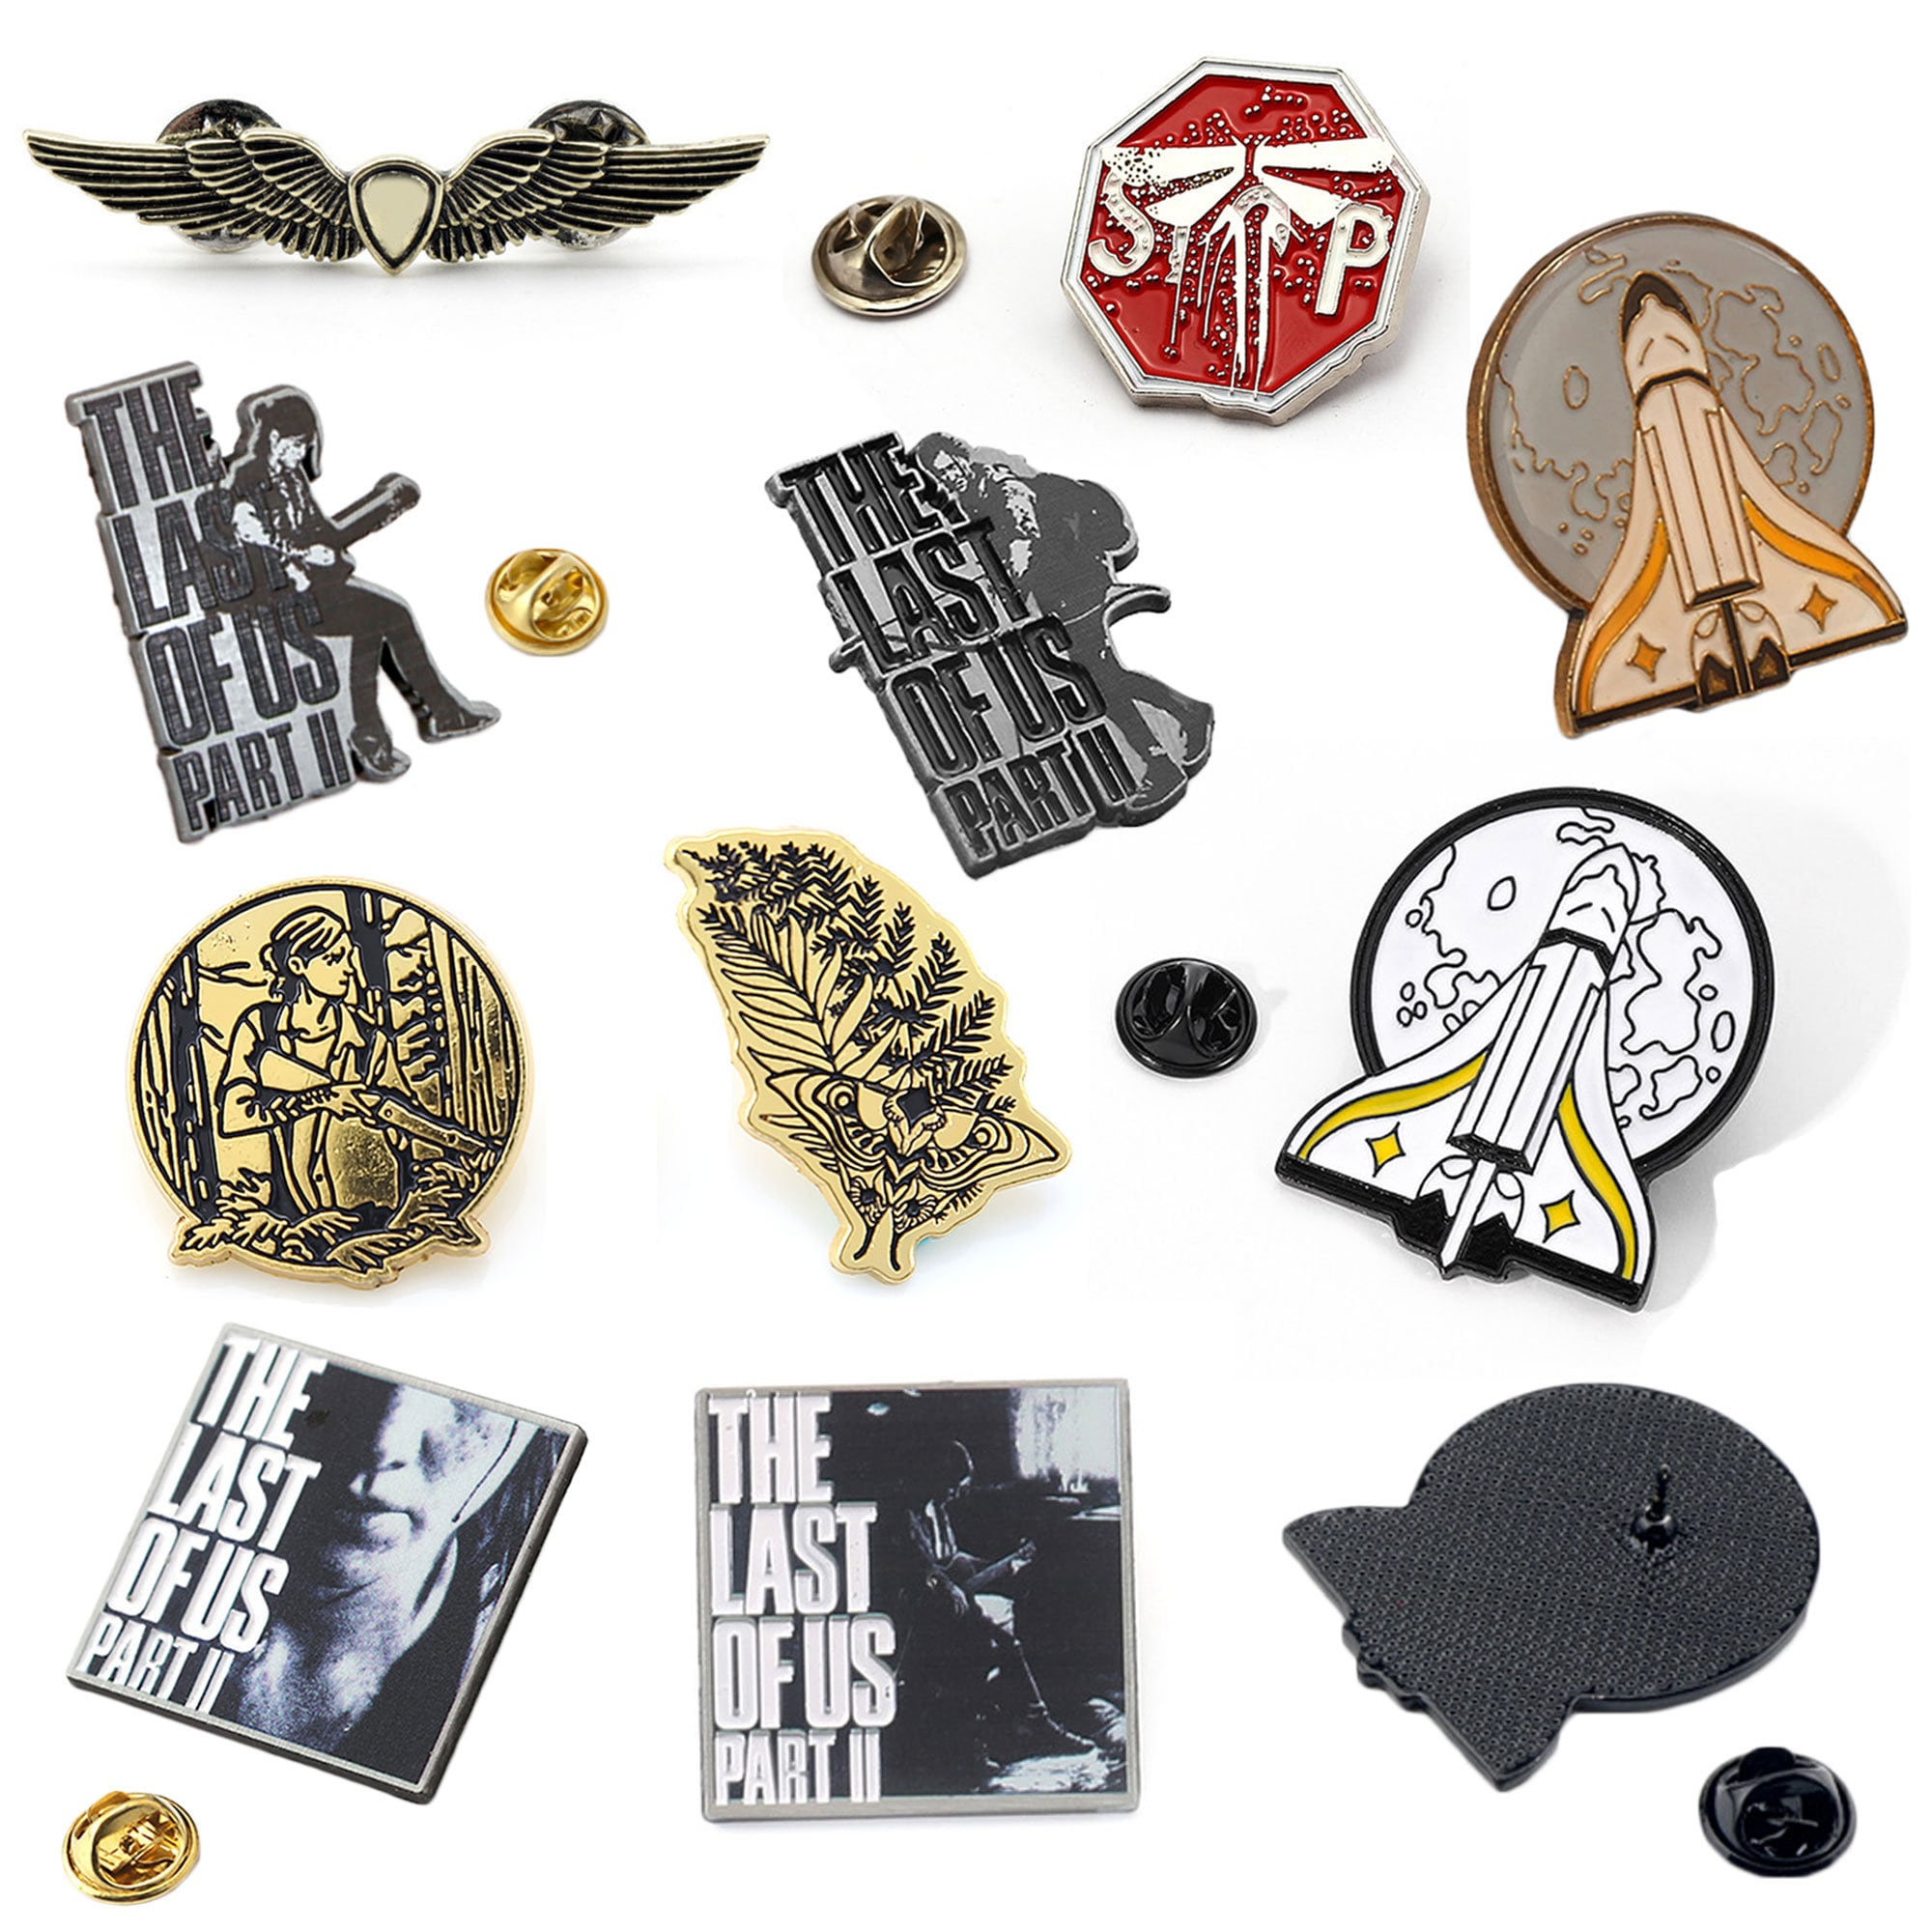 Game The Last of Us Part II 2 Firefly Logo Badges 3D Metal Brooches Pins  Cosplay Accessories Gifts Souvenir Pins